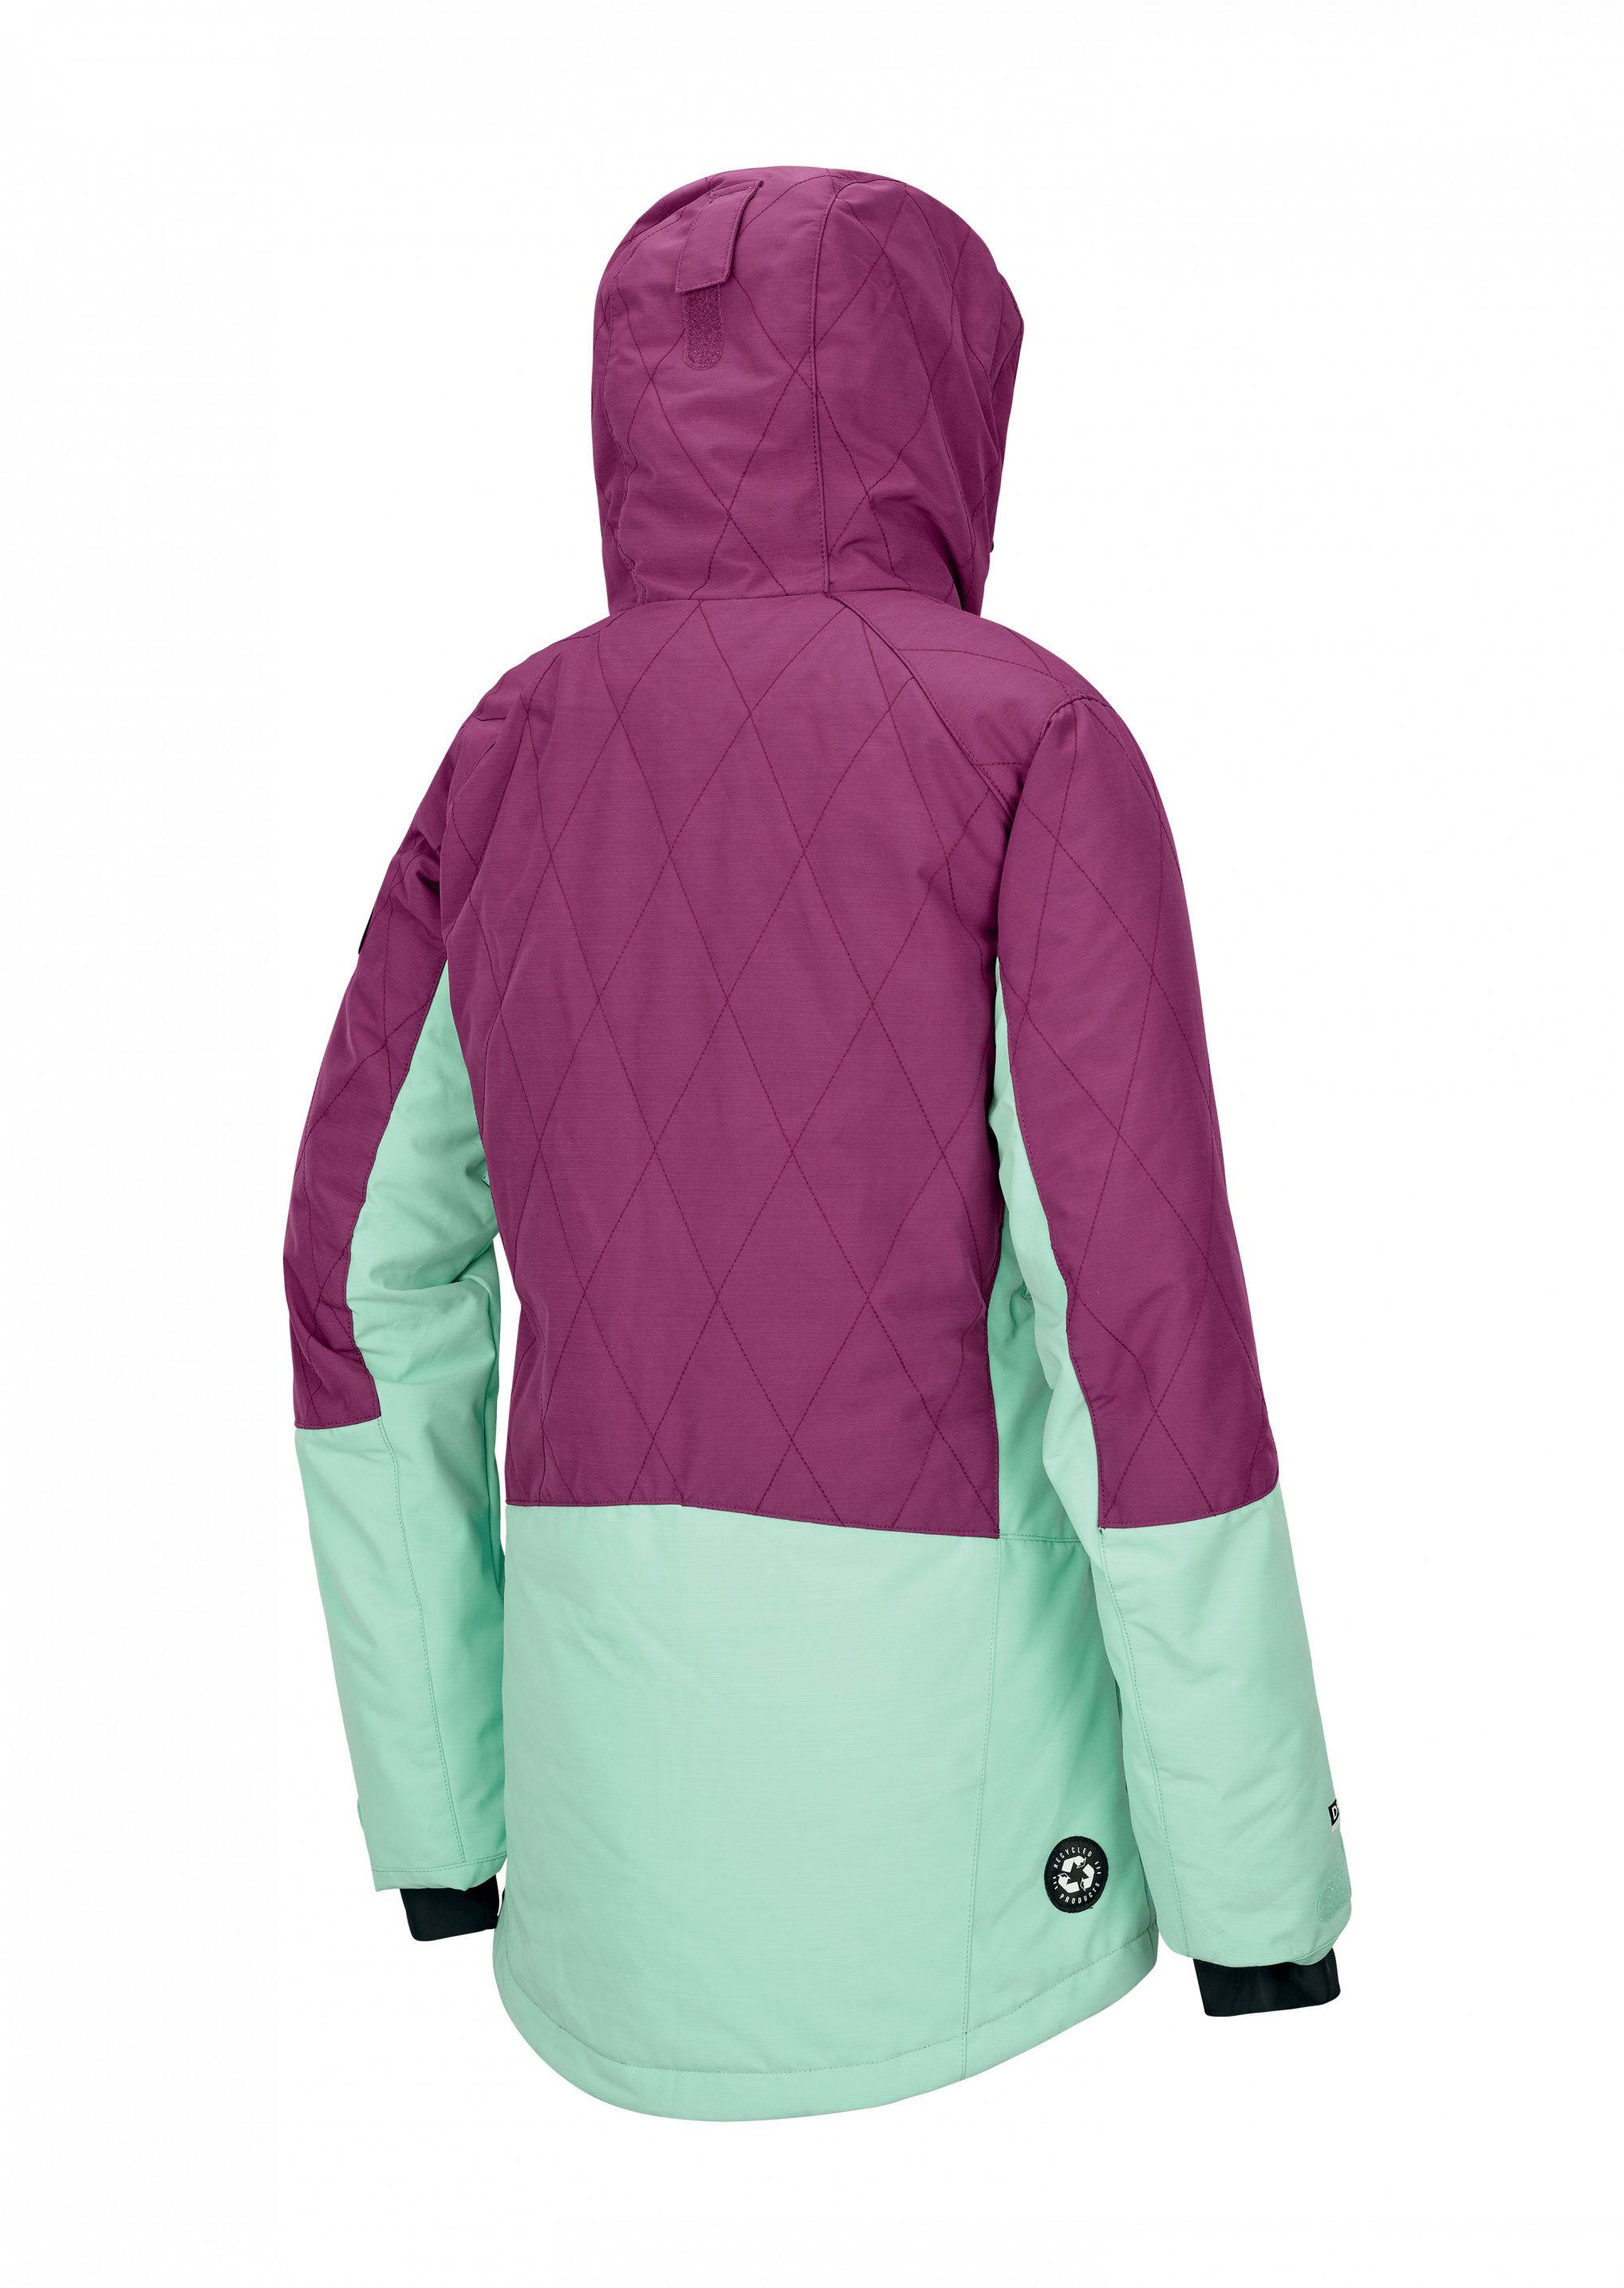 Picture Organic Clothing Mineral Jacket Women’s Raspberry S